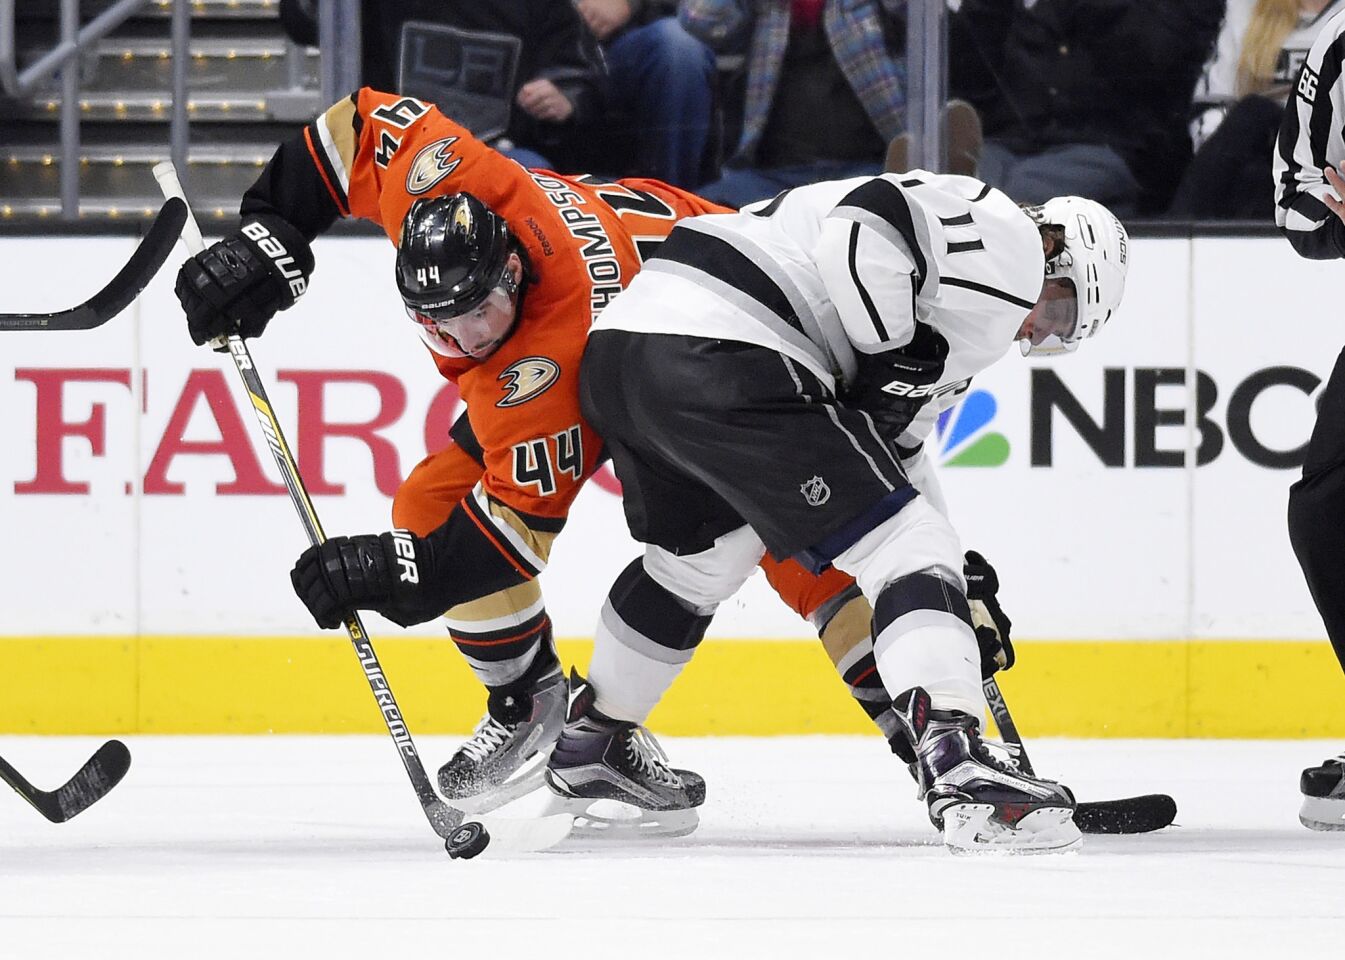 Ducks center Nate Thompson, left, and Kings center Anze Kopitar battle for the puck during the third period.